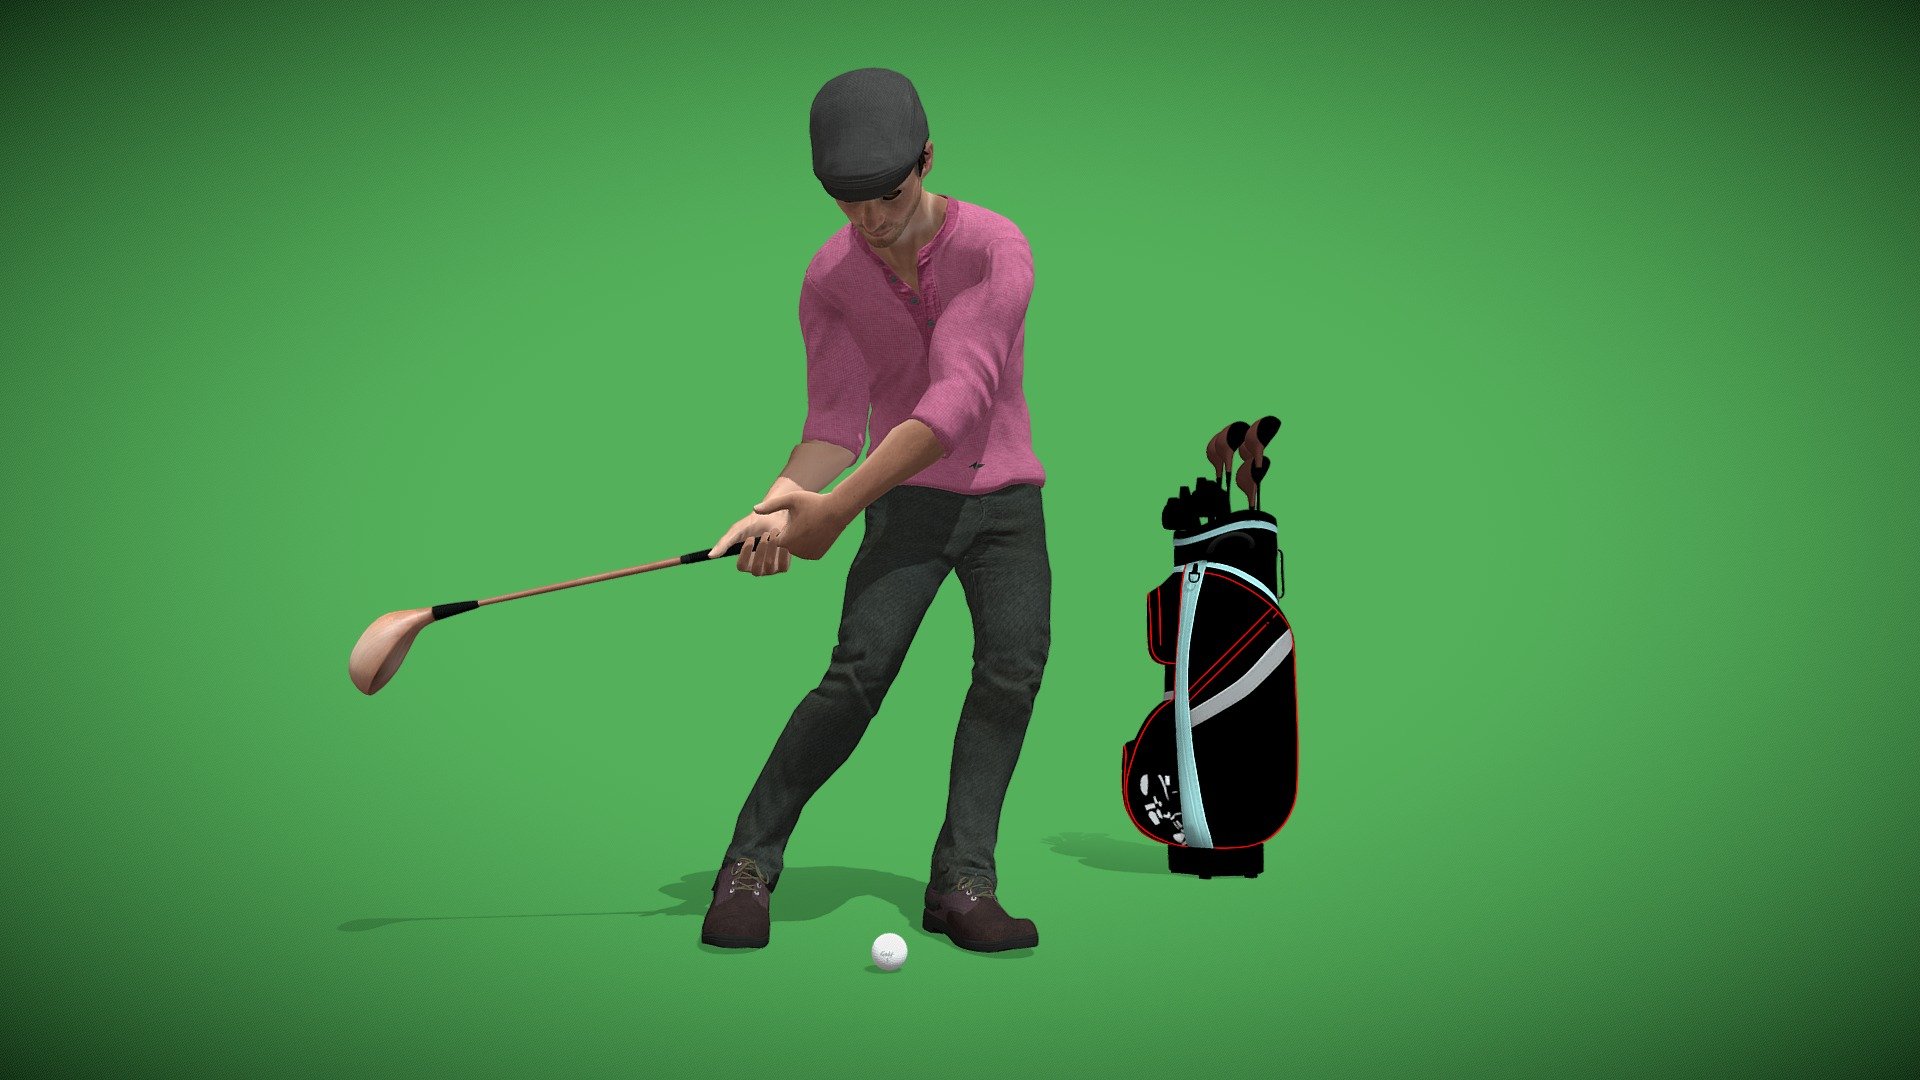 Male golfer swings golf club (driver) and drives golf ball, with golf bag and clubs in background, in this animated scene, at 30 frames per second.

See this 3D model in action, and more models like it, here in this collection of free augmeneted reality apps:

https://morpheusar.com/ - Animated Golfer Drives Ball with Club - 3D model by LasquetiSpice 3d model